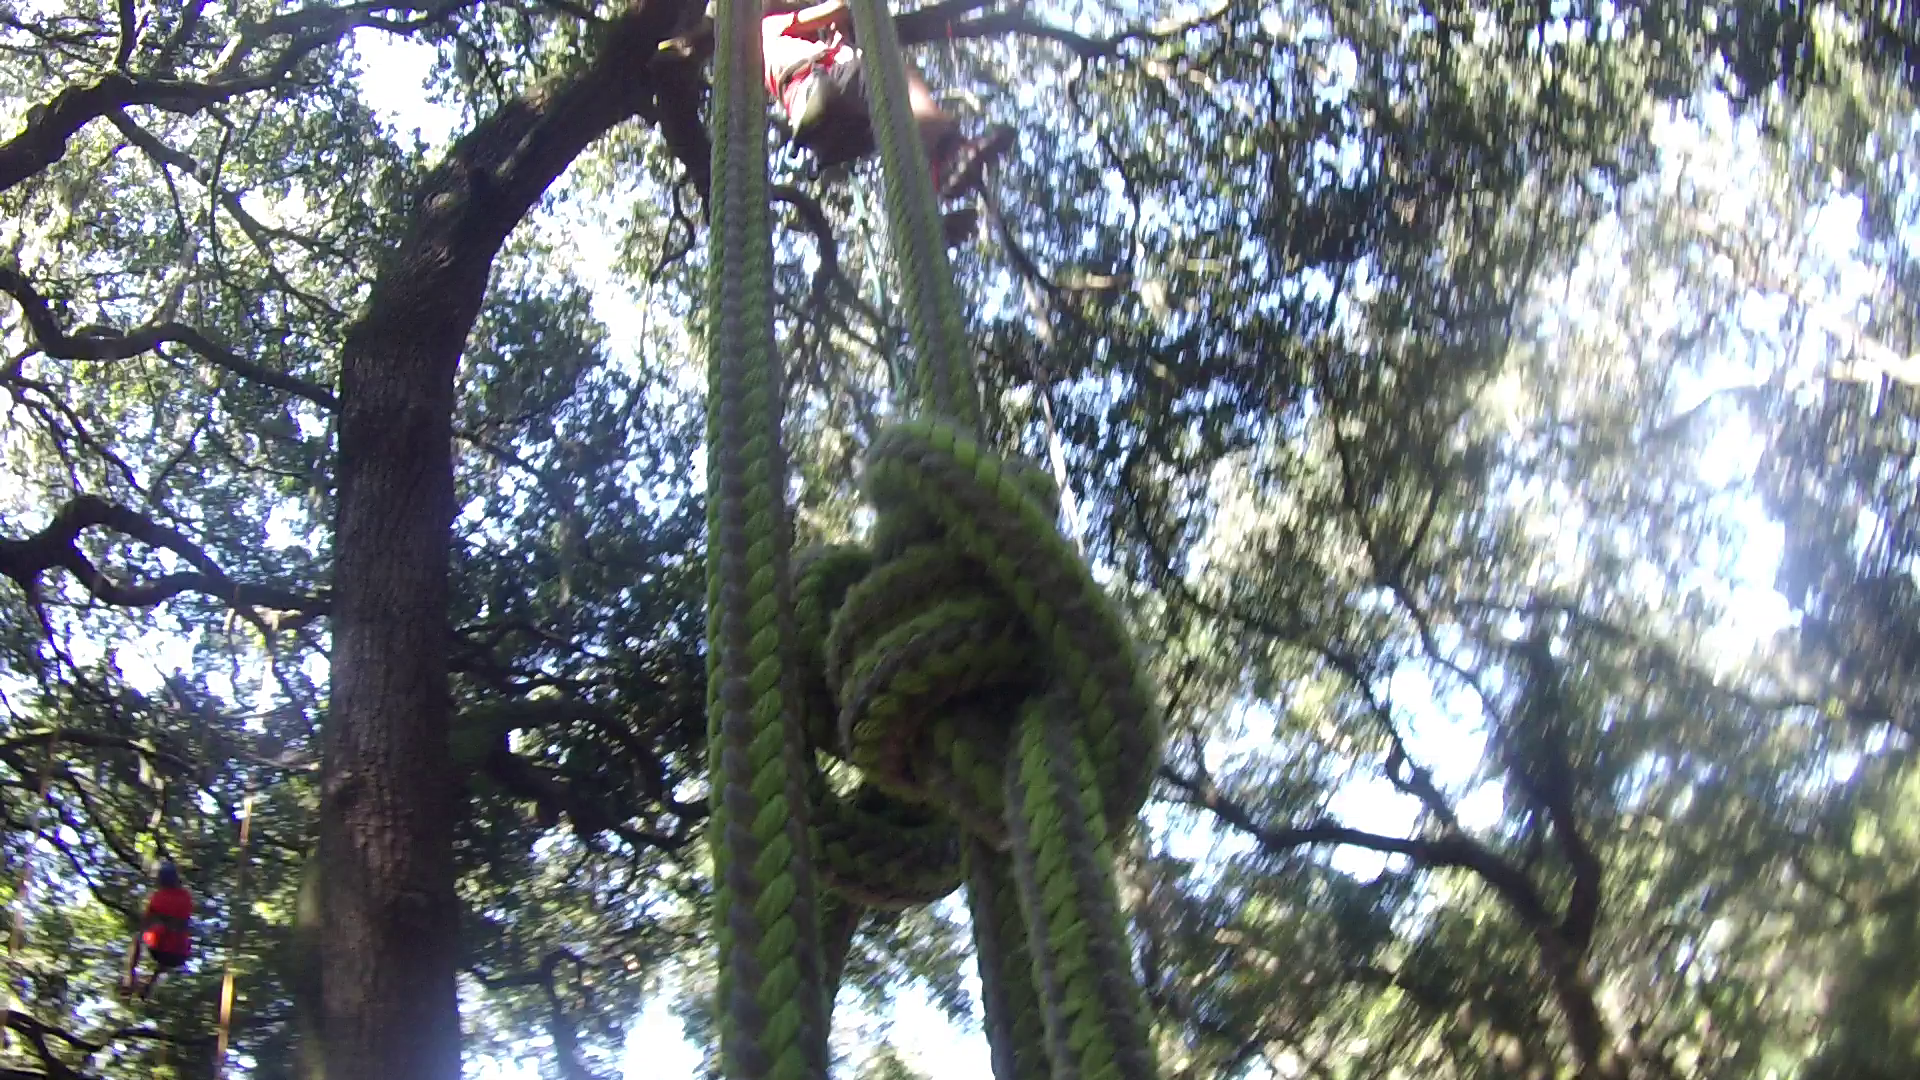 A tree climbing knot in the foreground with two recreational tree climbers in the background.